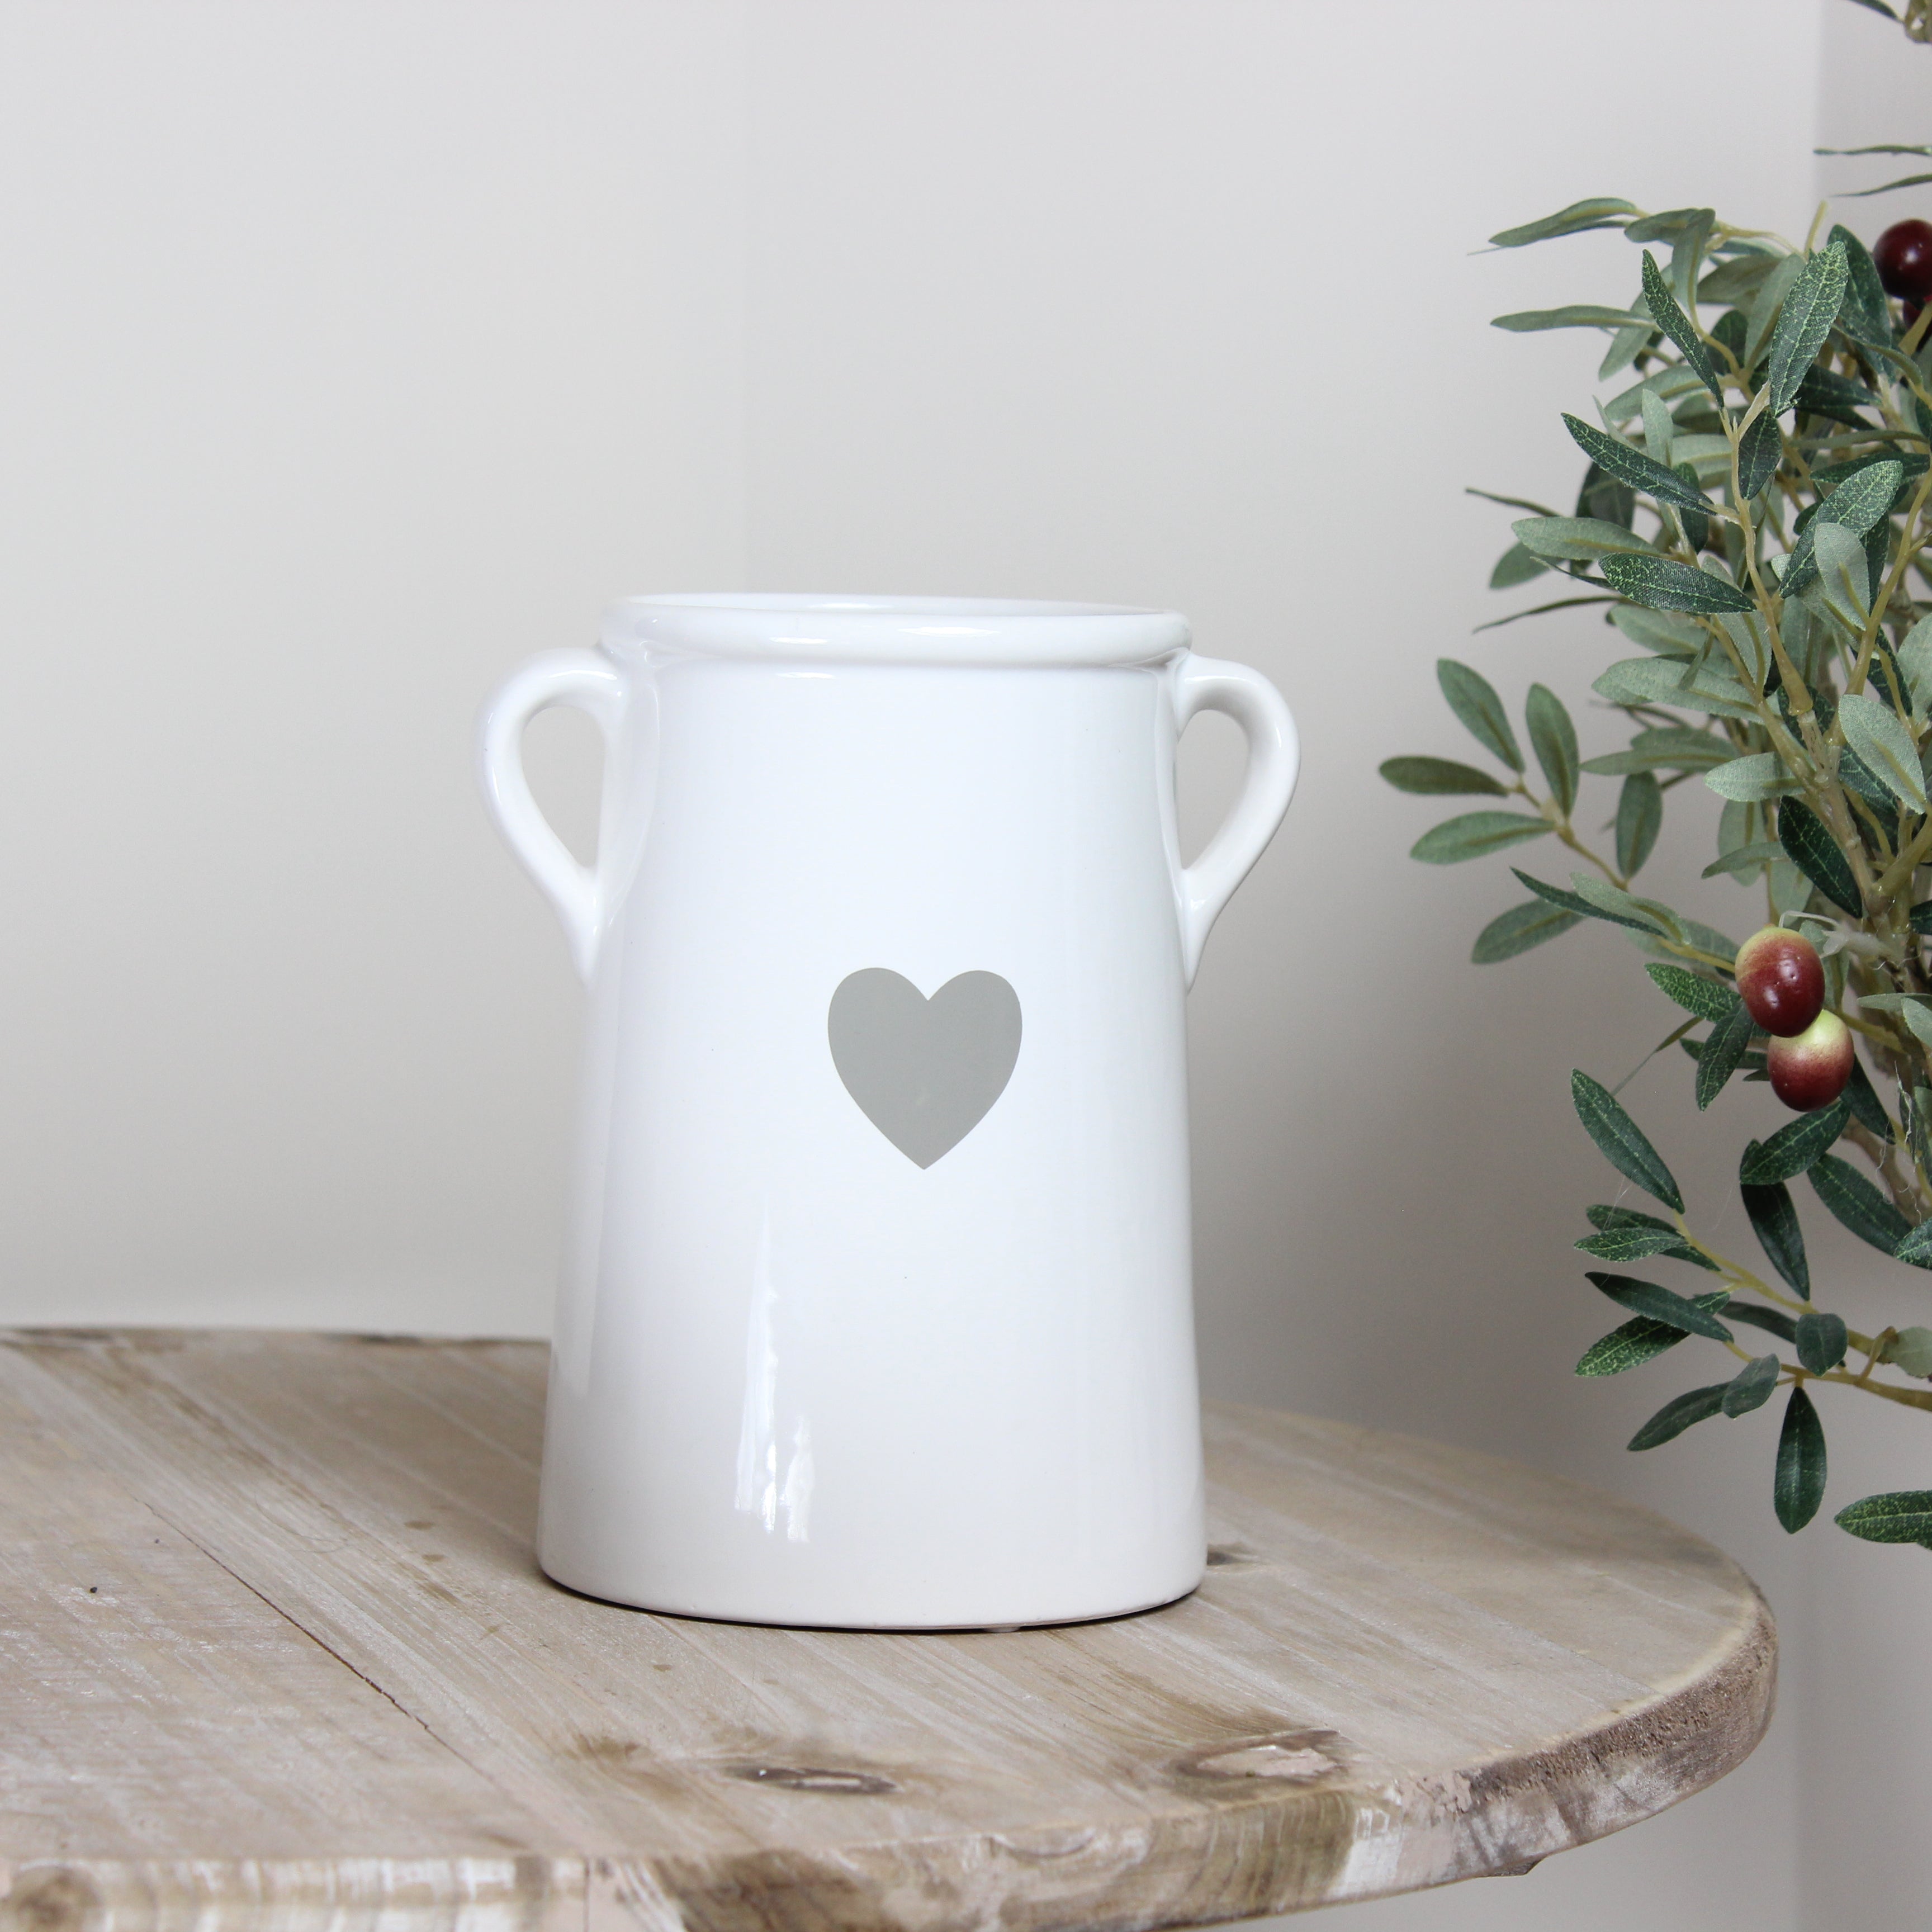 Large White Heart Ceramic Pot With Handles